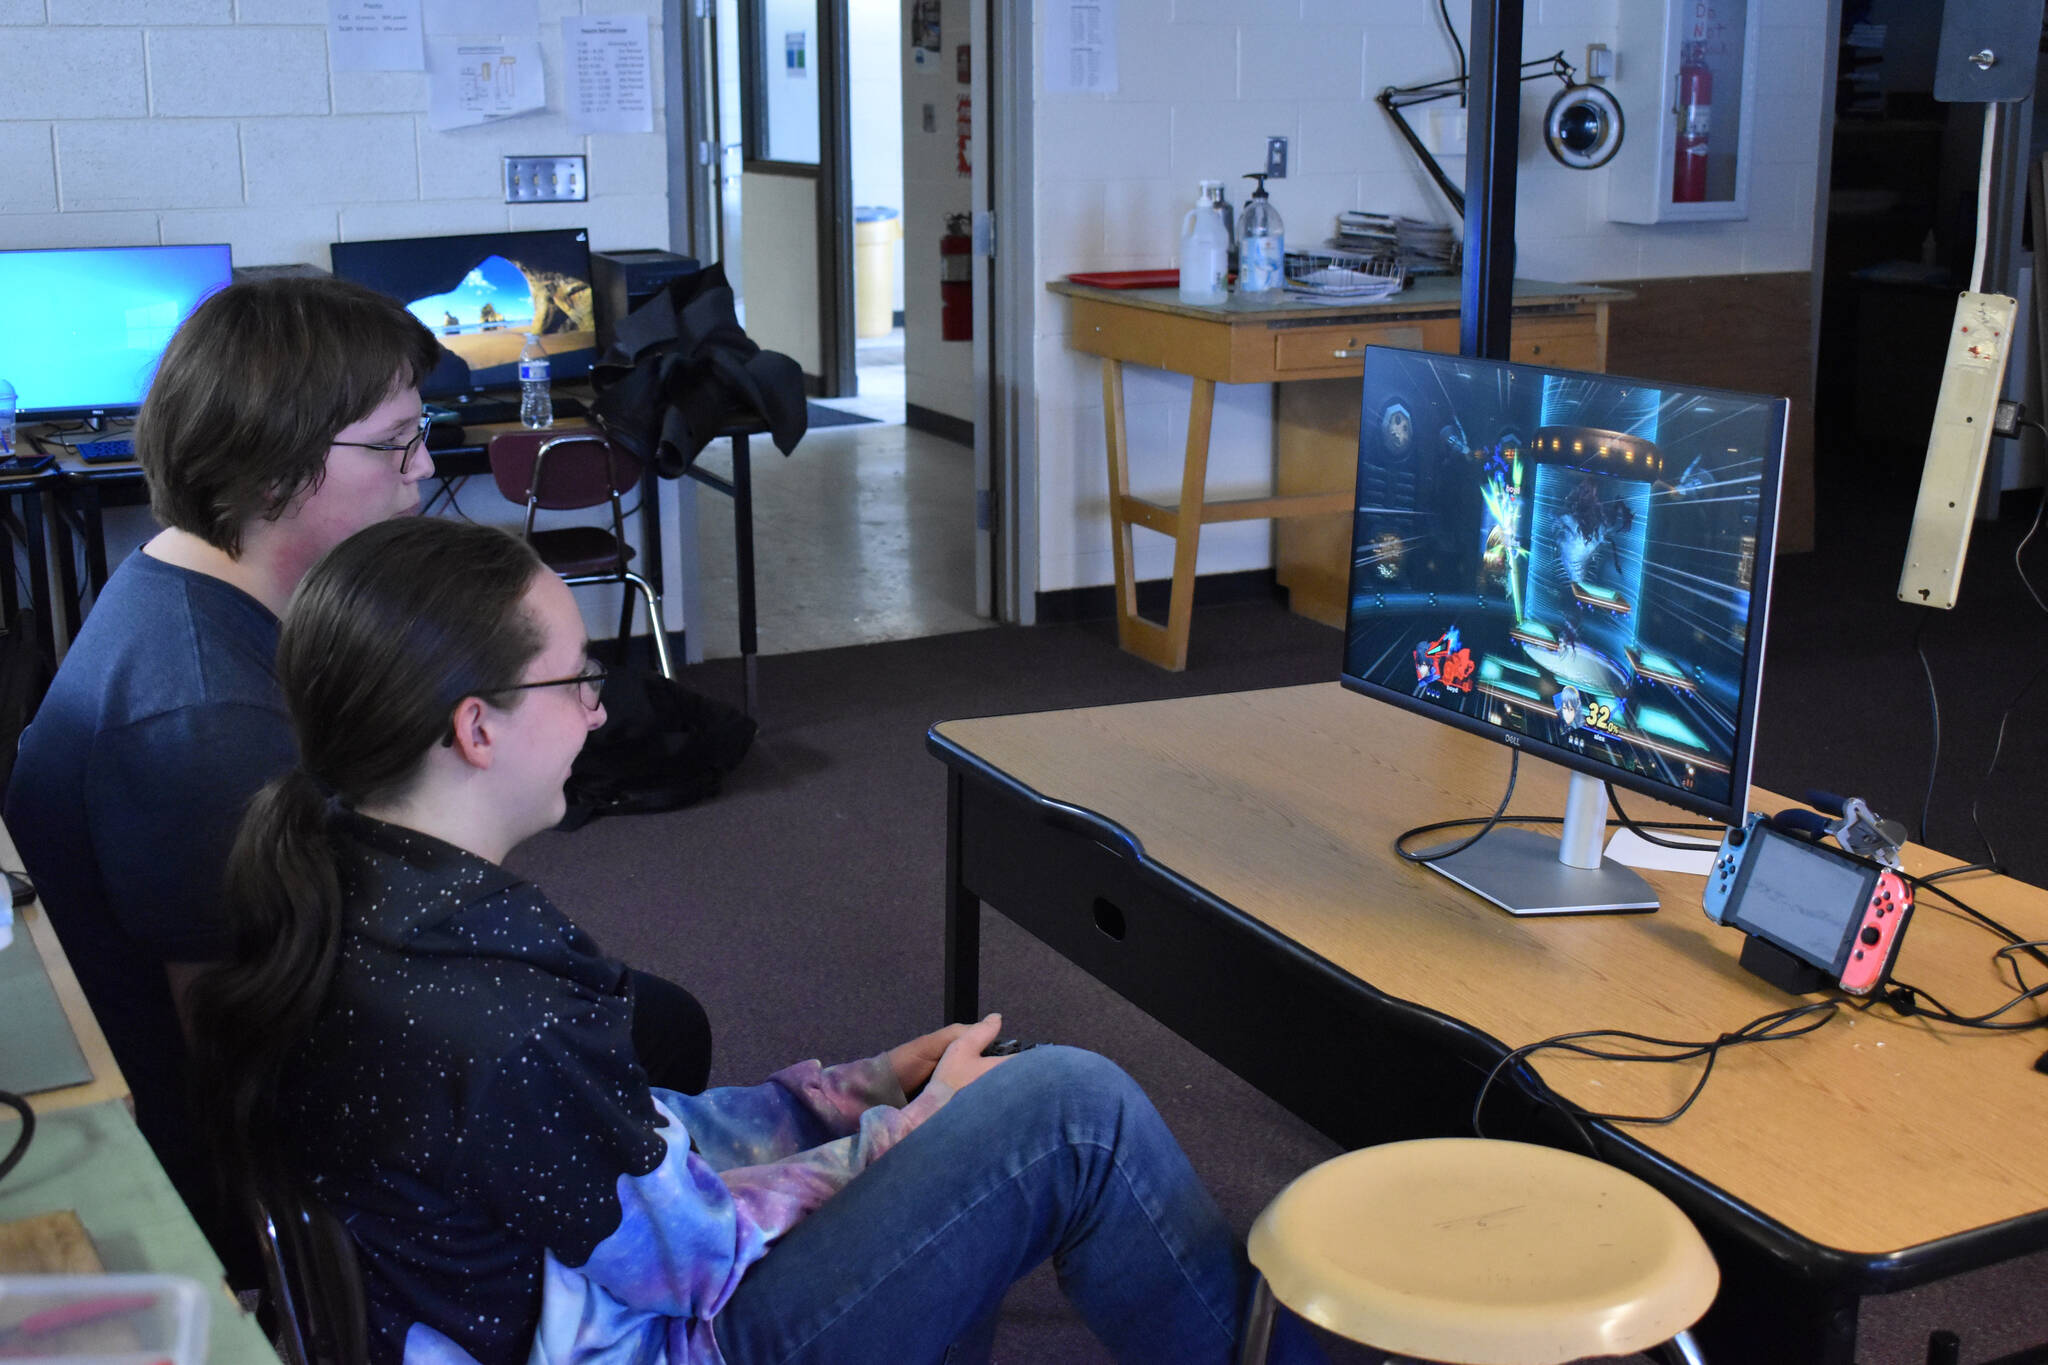 Kenai Central High School esports players participate in a practice match of Super Smash Bros. Ultimate ahead of a scheduled game at Kenai Central High School in Kenai, Alaska, on Wednesday, Feb. 15, 2023. (Jake Dye/Peninsula Clarion)